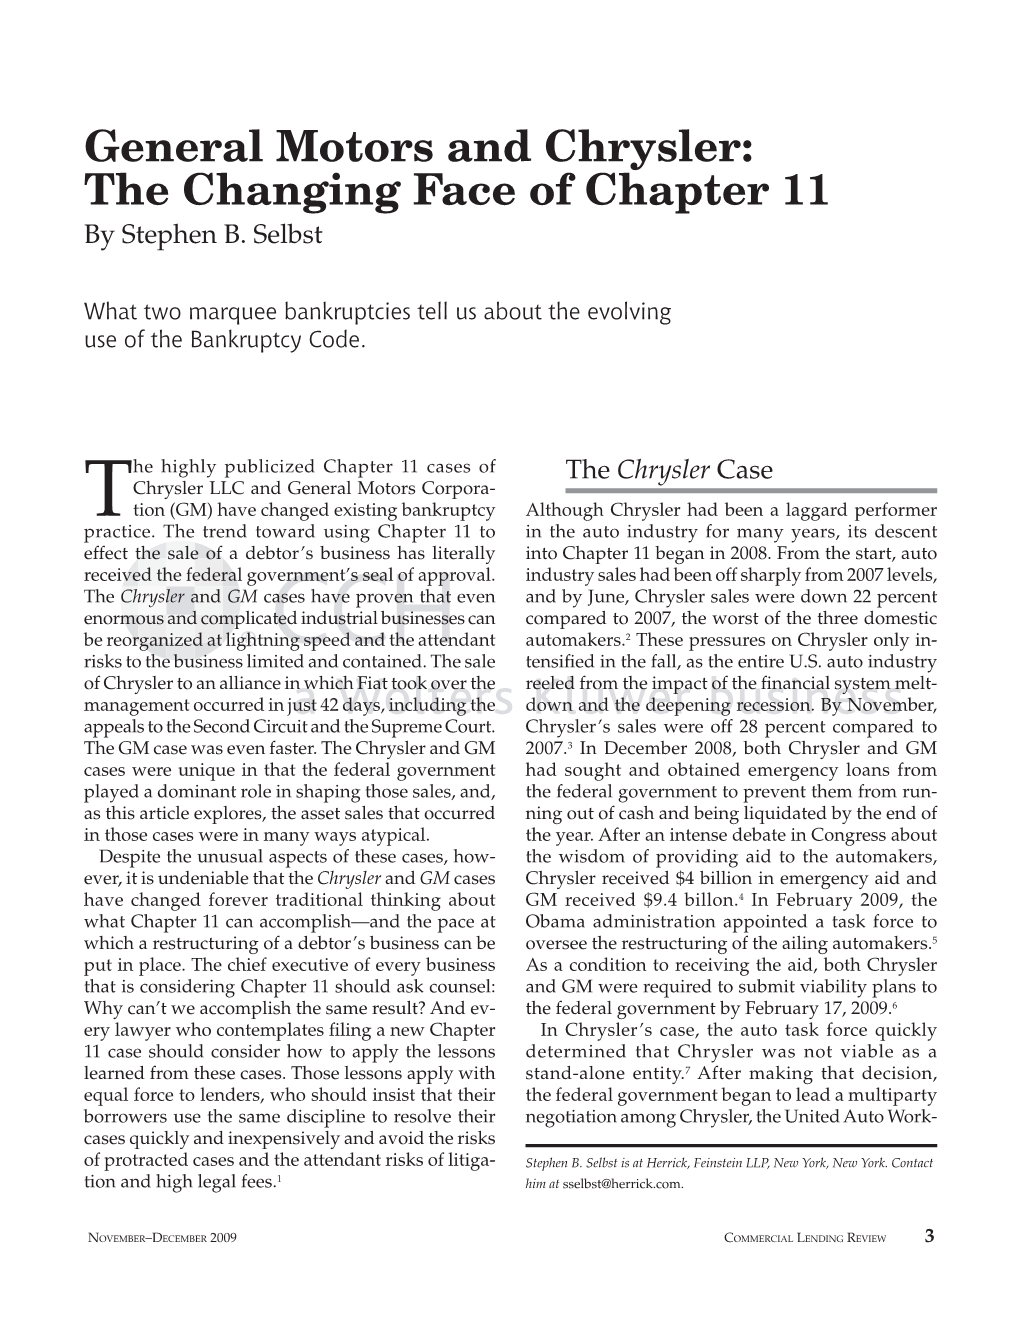 General Motors and Chrysler: the Changing Face of Chapter 11 by Stephen B